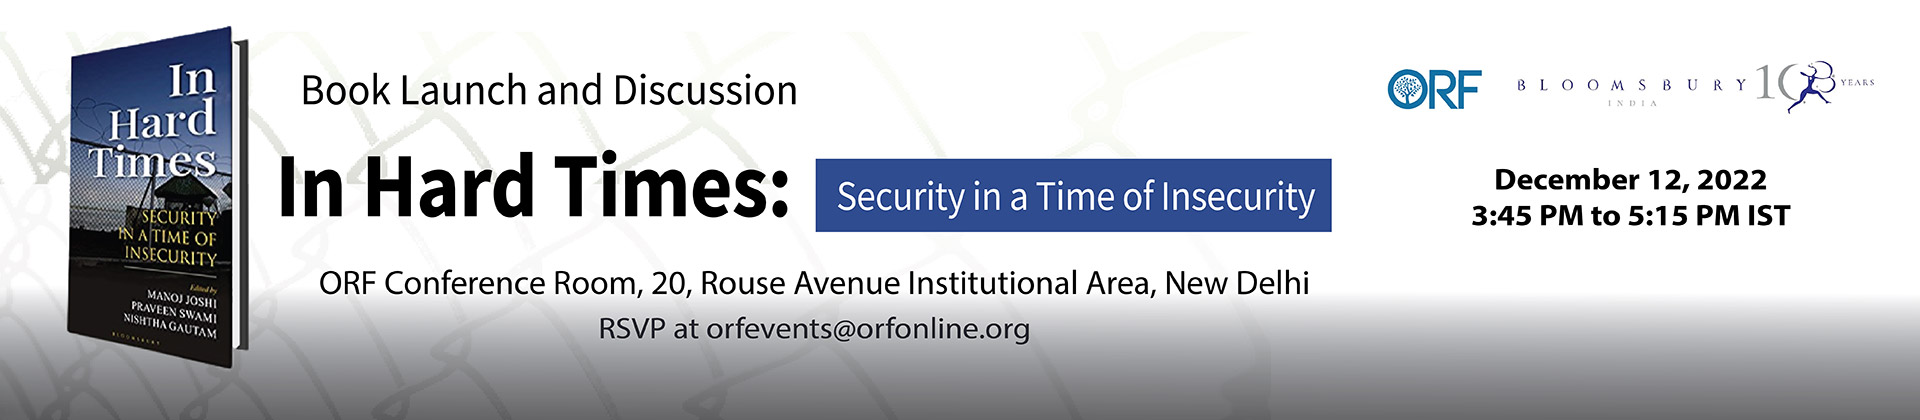 Book Launch and Discussion | In Hard Times: Security in a Time of Insecurity